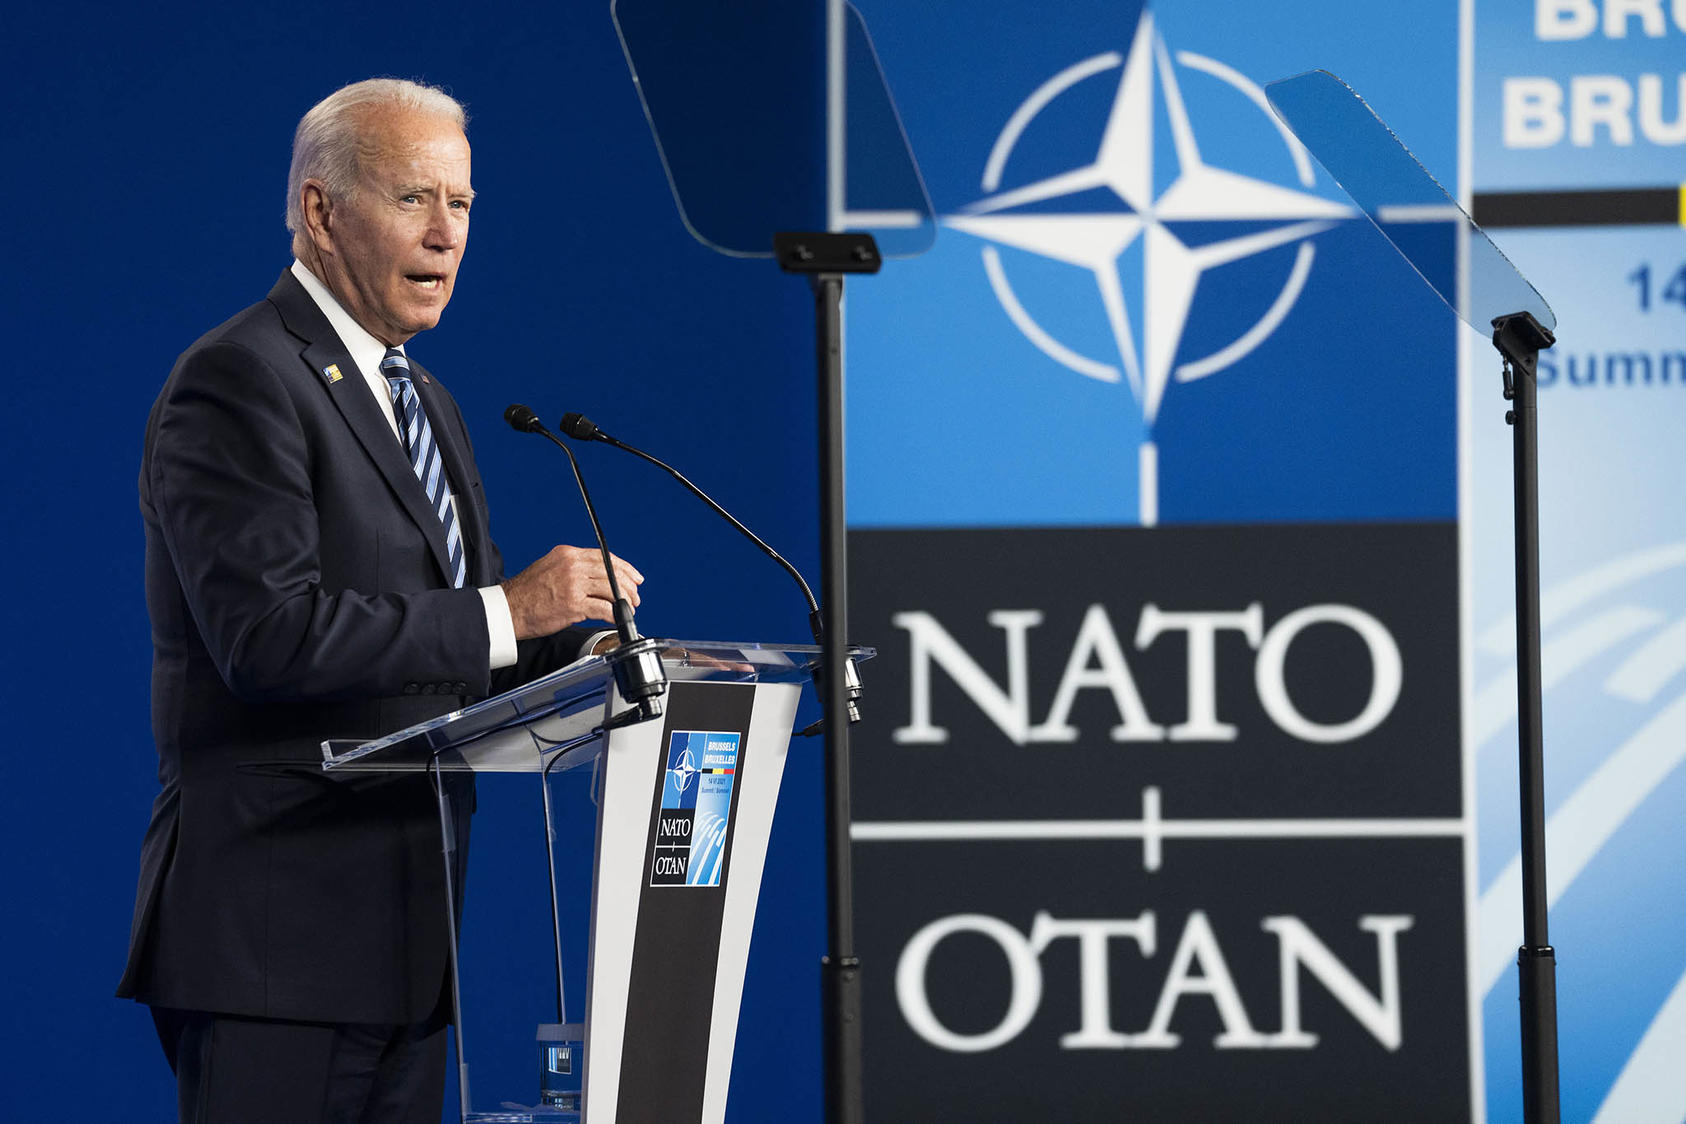 President Joe Biden addresses a news conference at NATO headquarters in Brussels on Monday, June 14, 2021, after a summit that made China’s growing military assertiveness a focus. (Doug Mills/The New York Times)